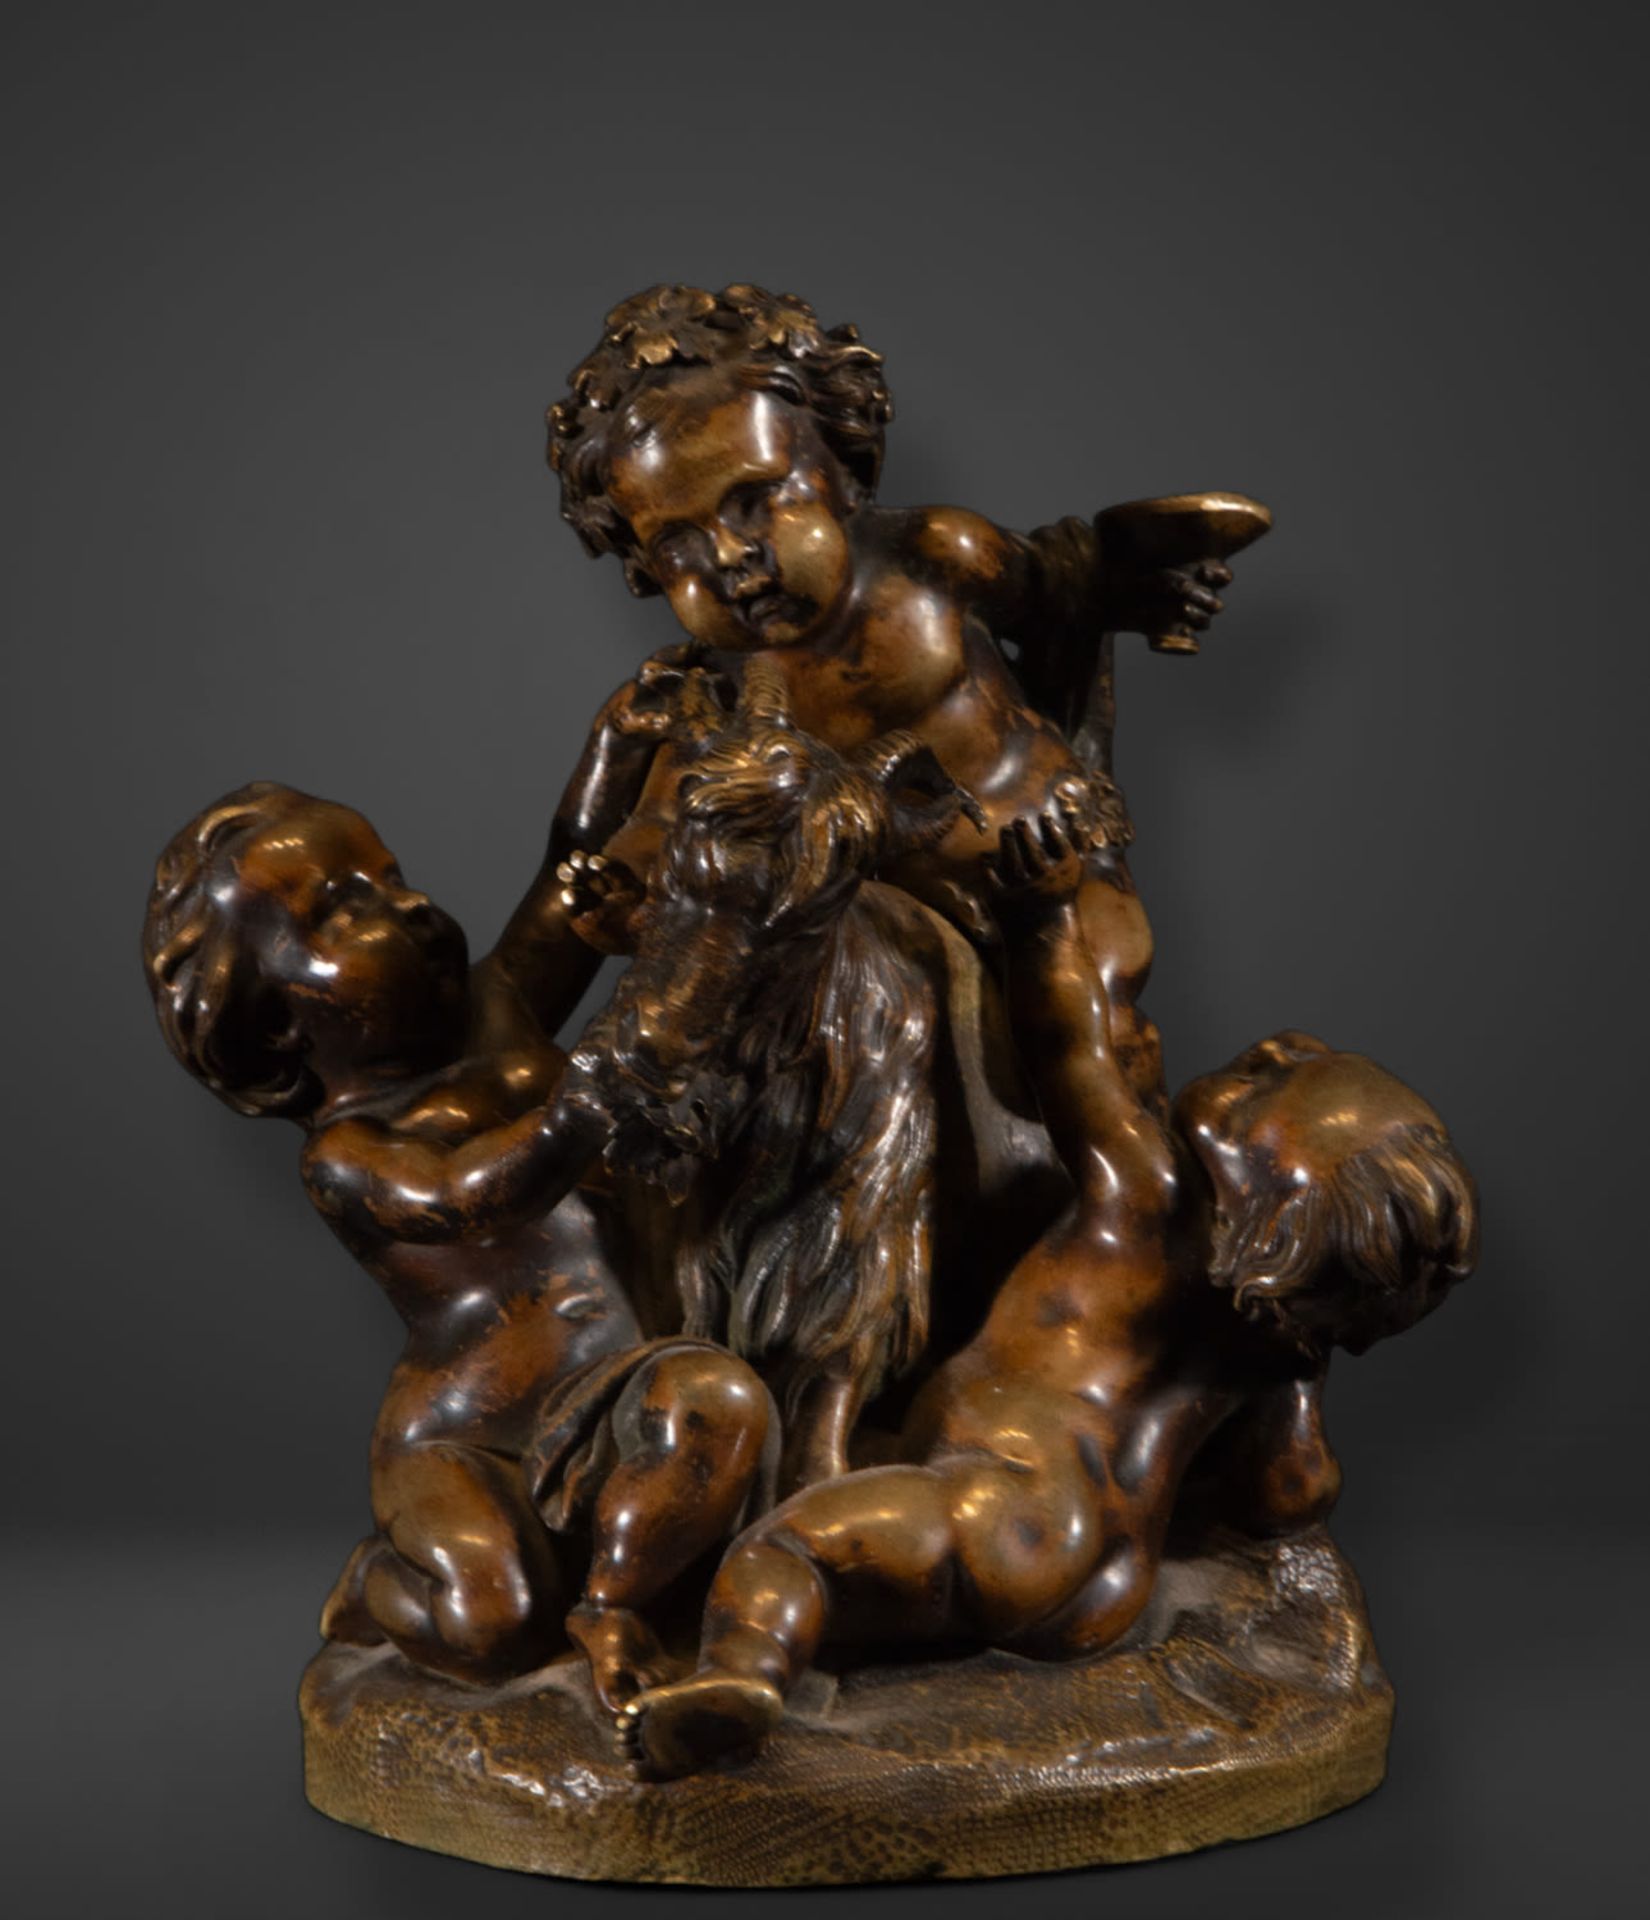 Allegorical bronze sculpture of Amours playing with a goat, 19th century